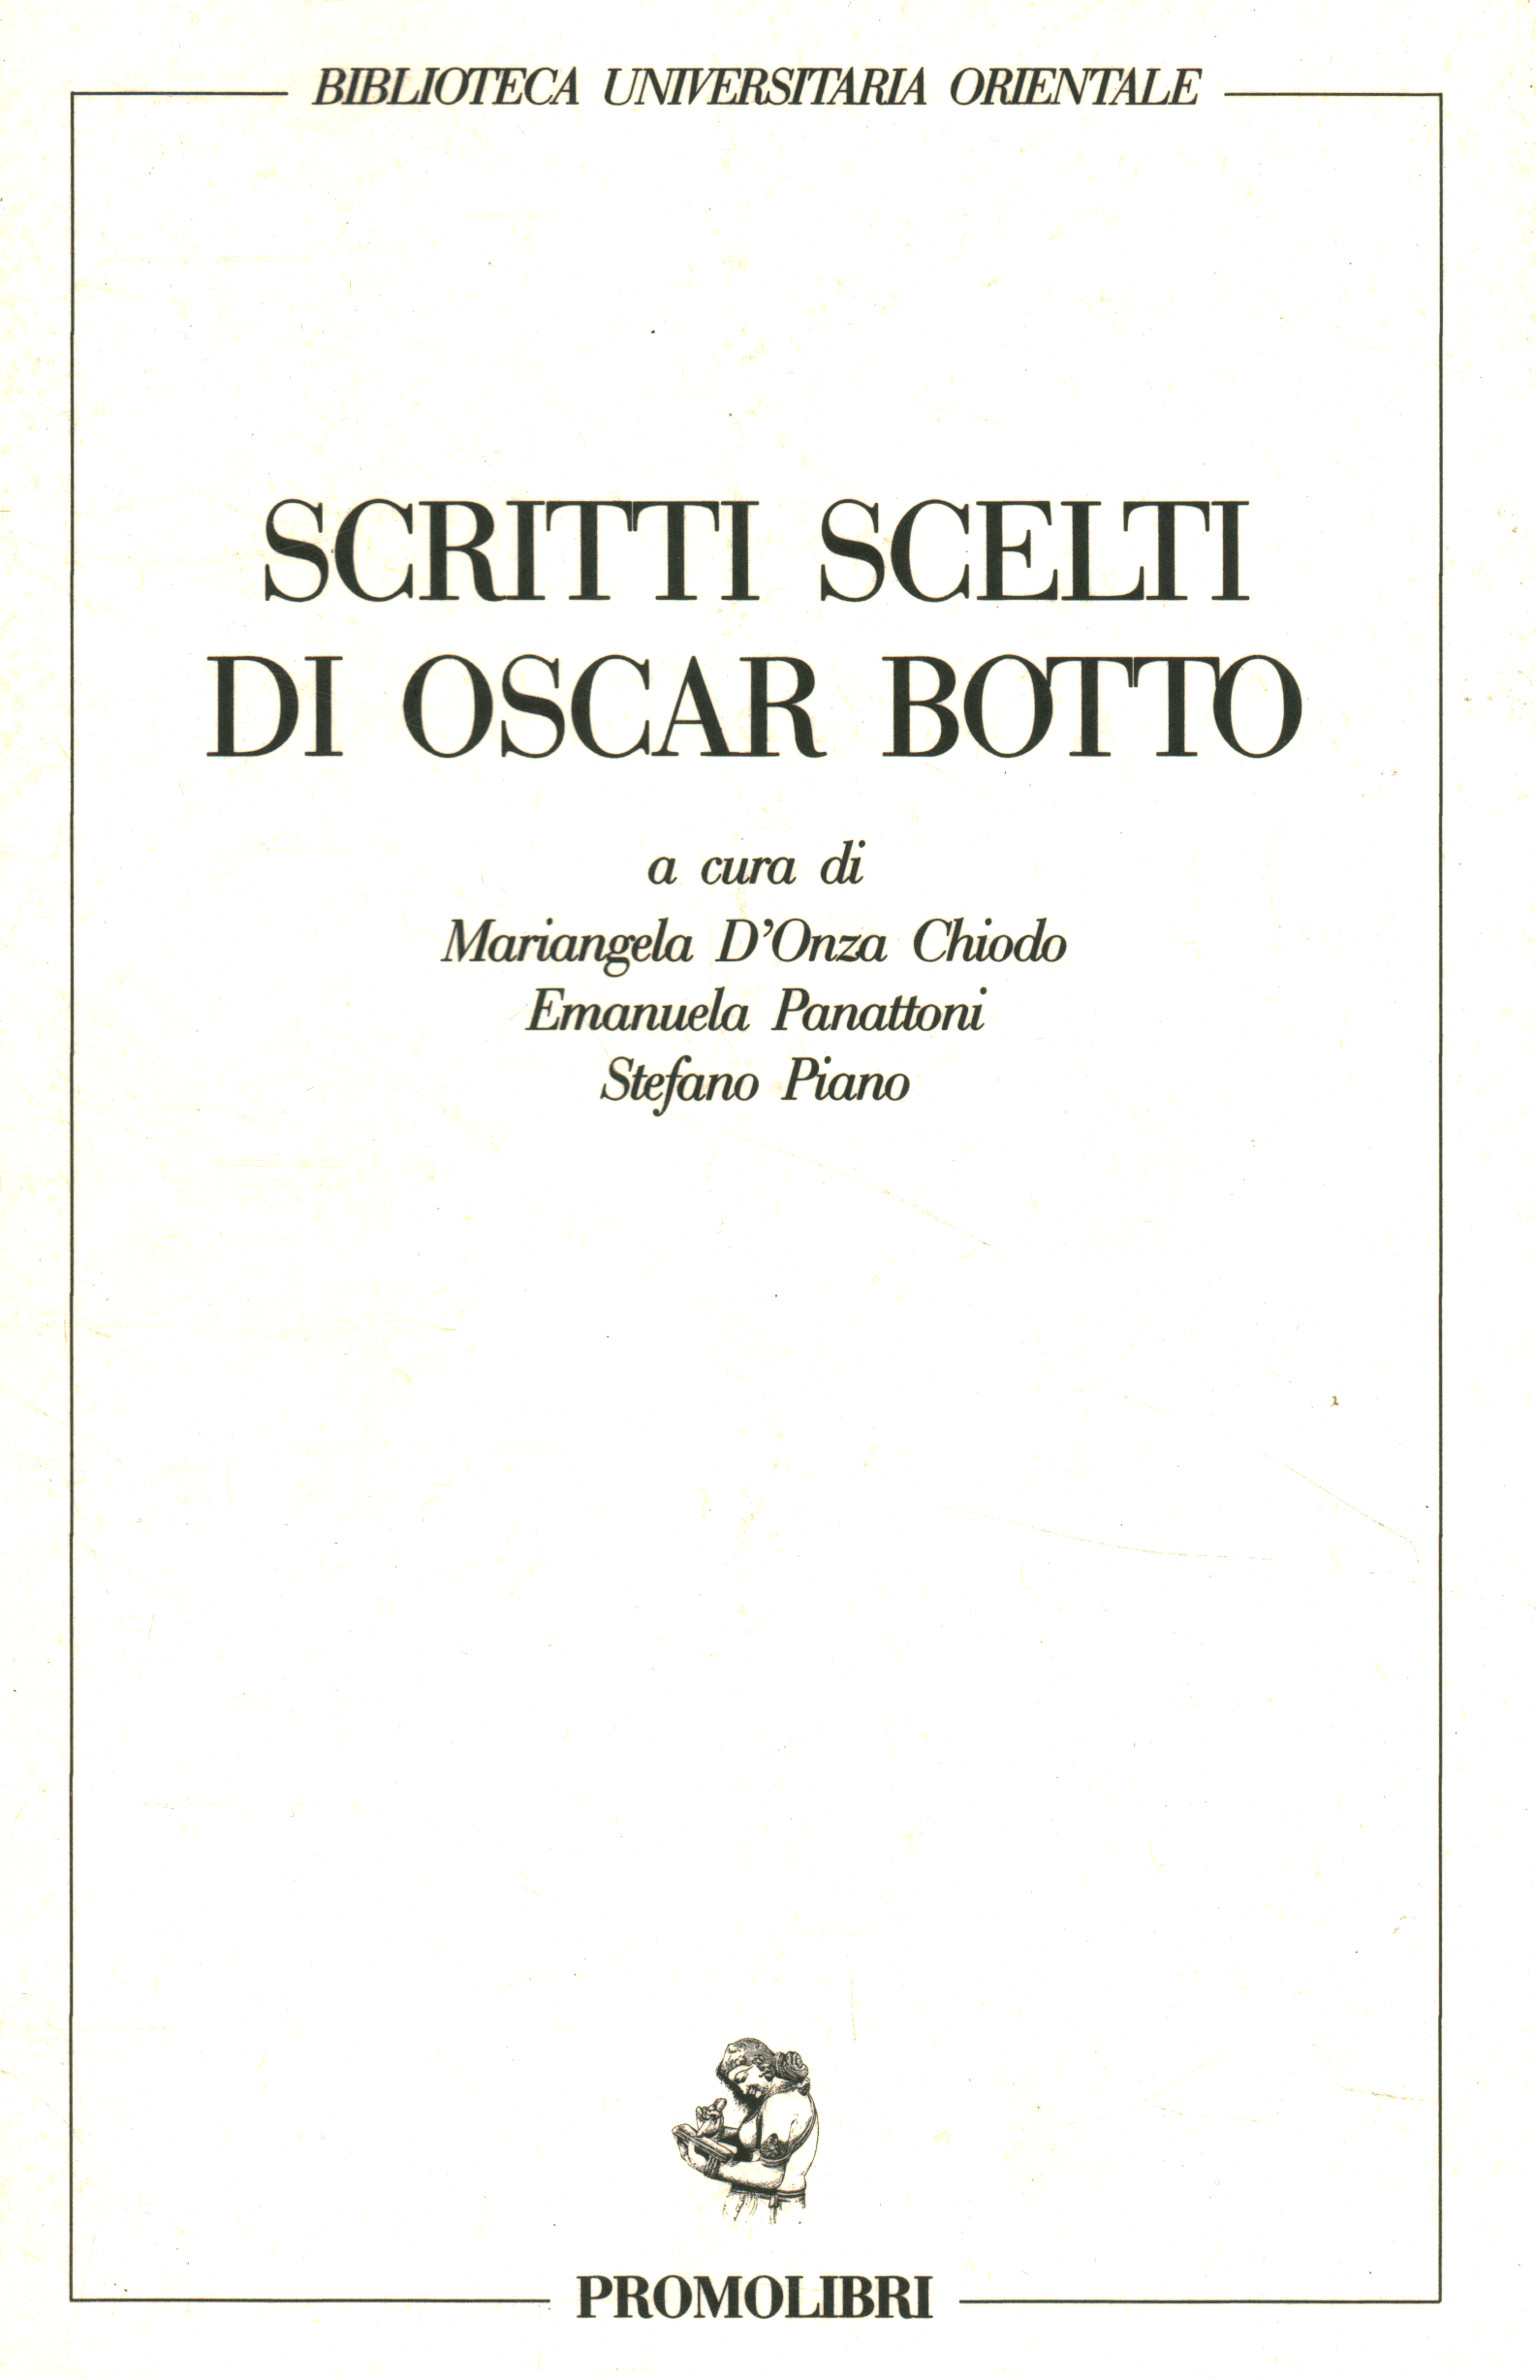 Selected Writings by Oscar Botto